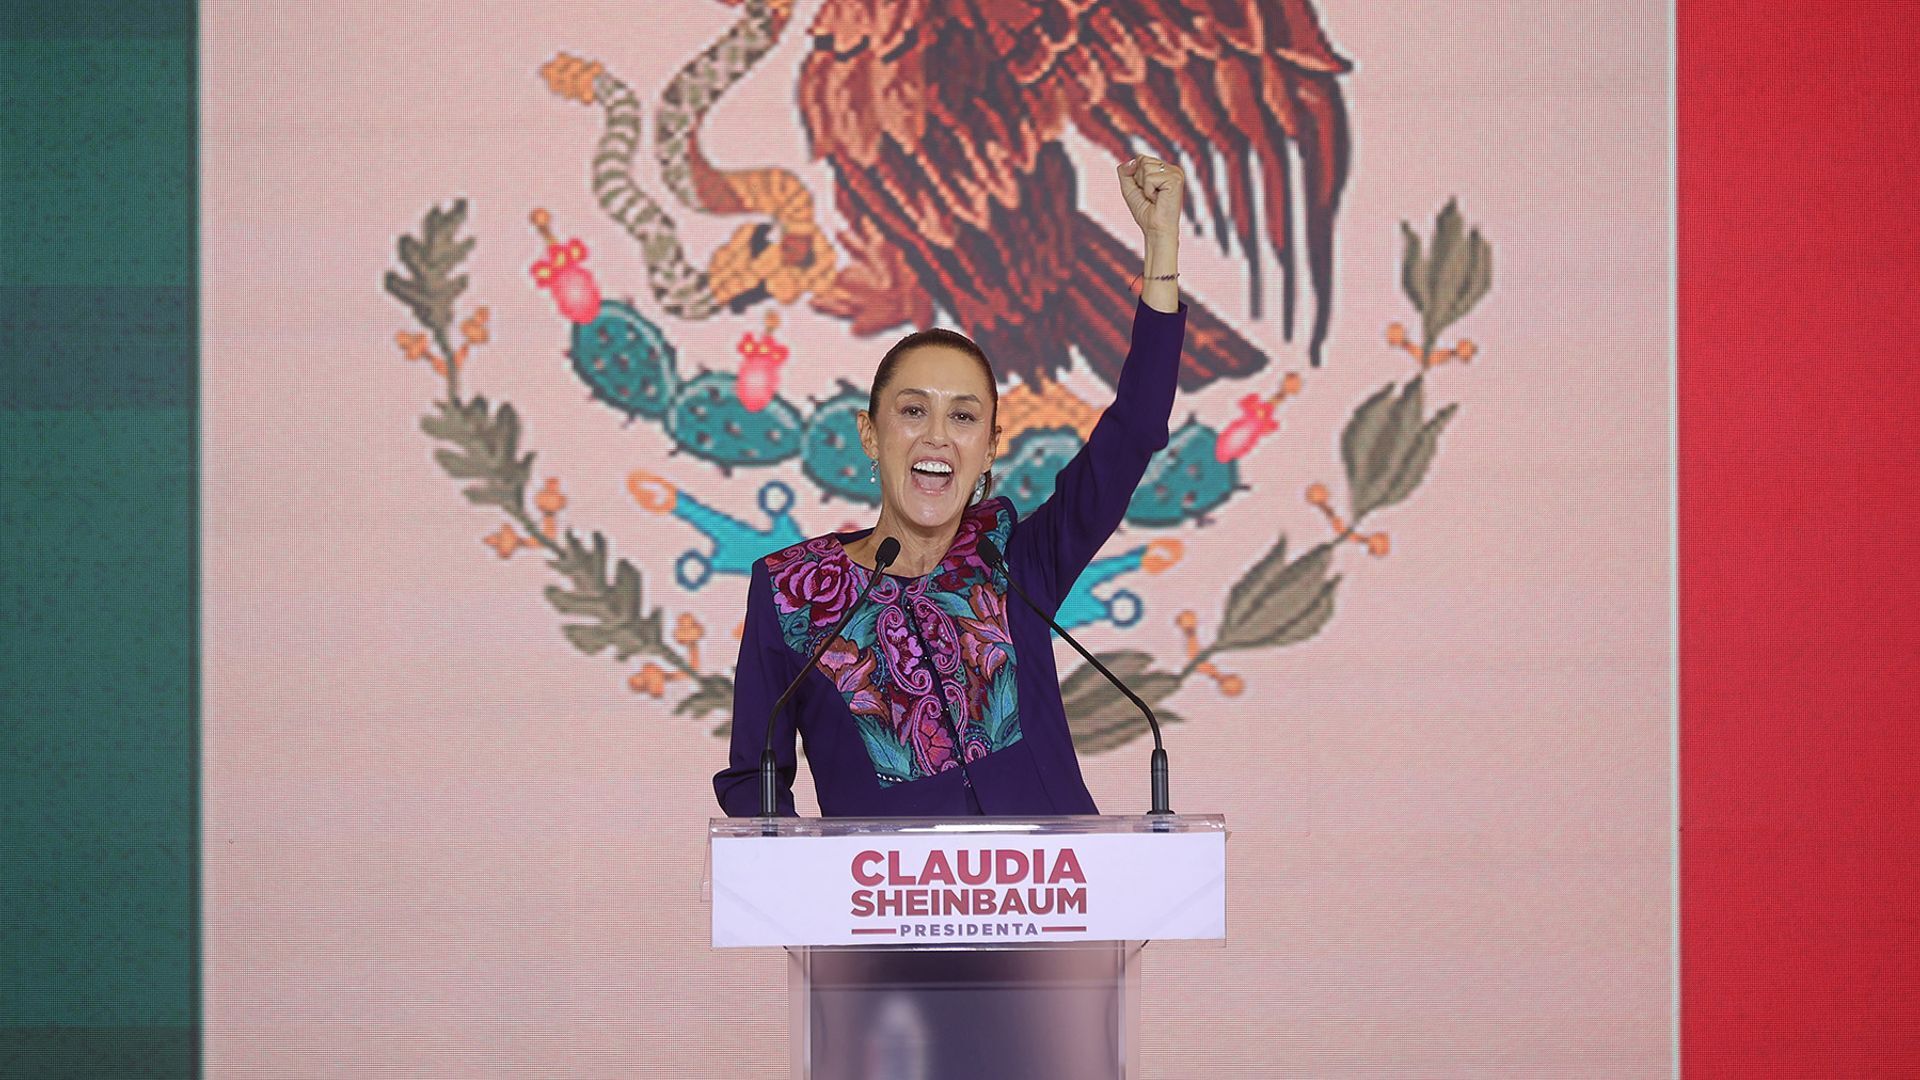 Newly elected Mexican President Claudia Sheinbaum will likely continue outgoing President Obrador's causes.